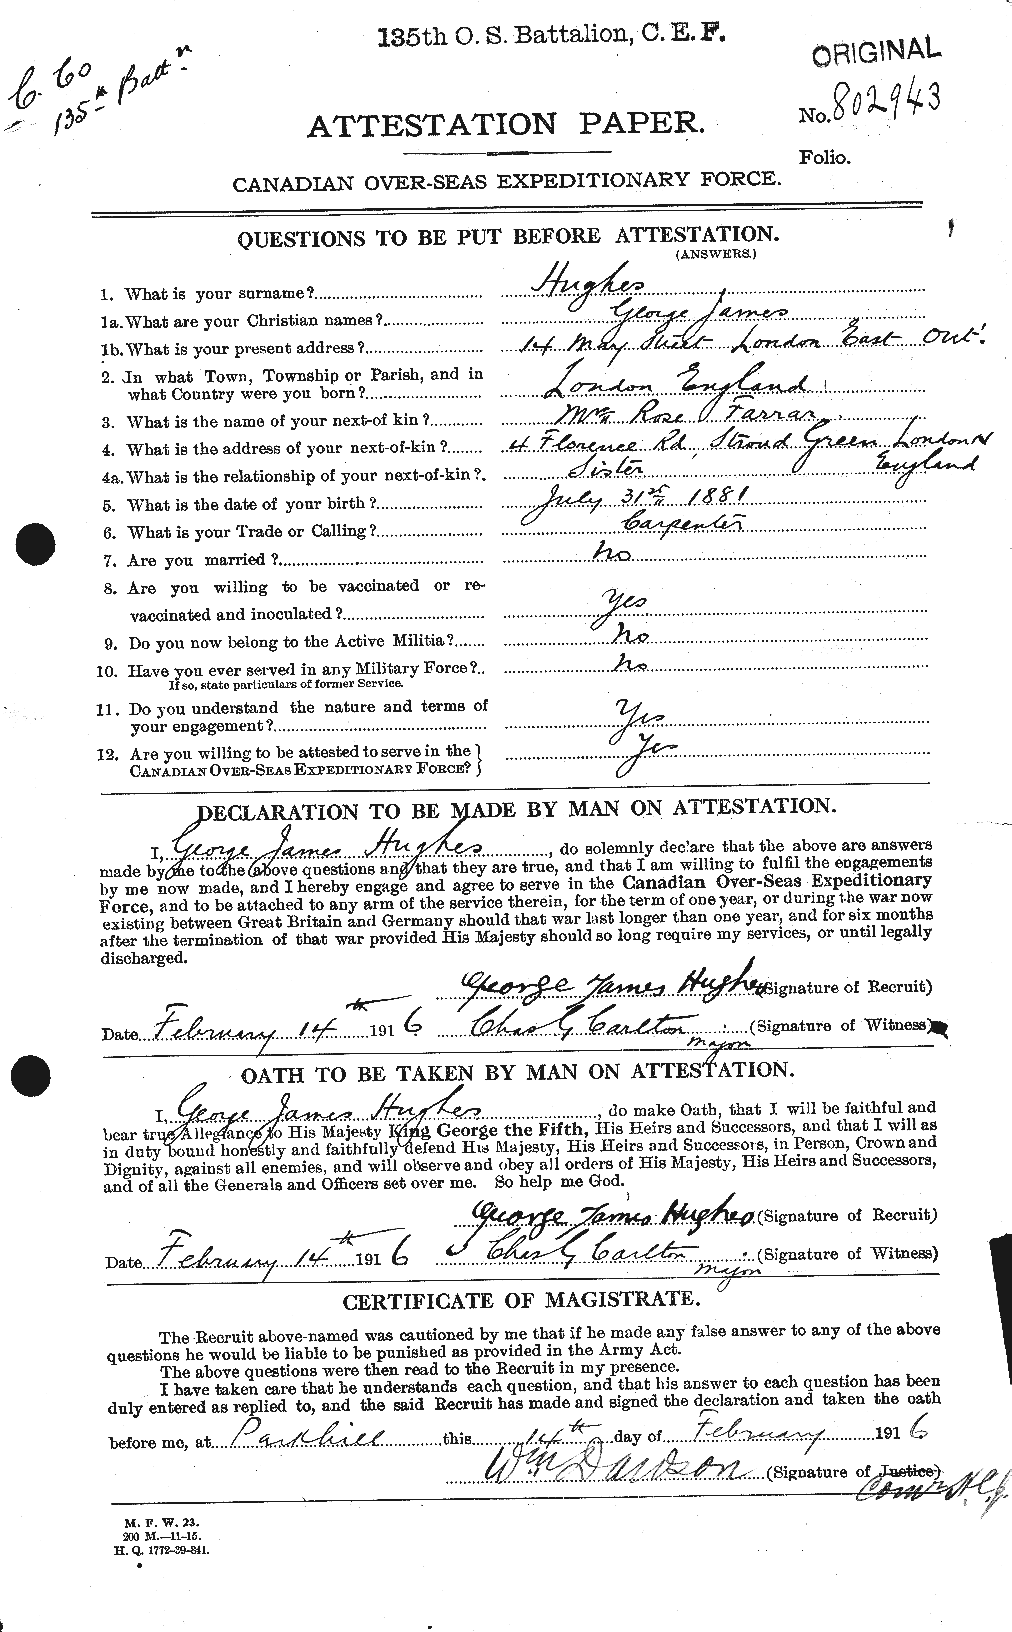 Personnel Records of the First World War - CEF 403833a